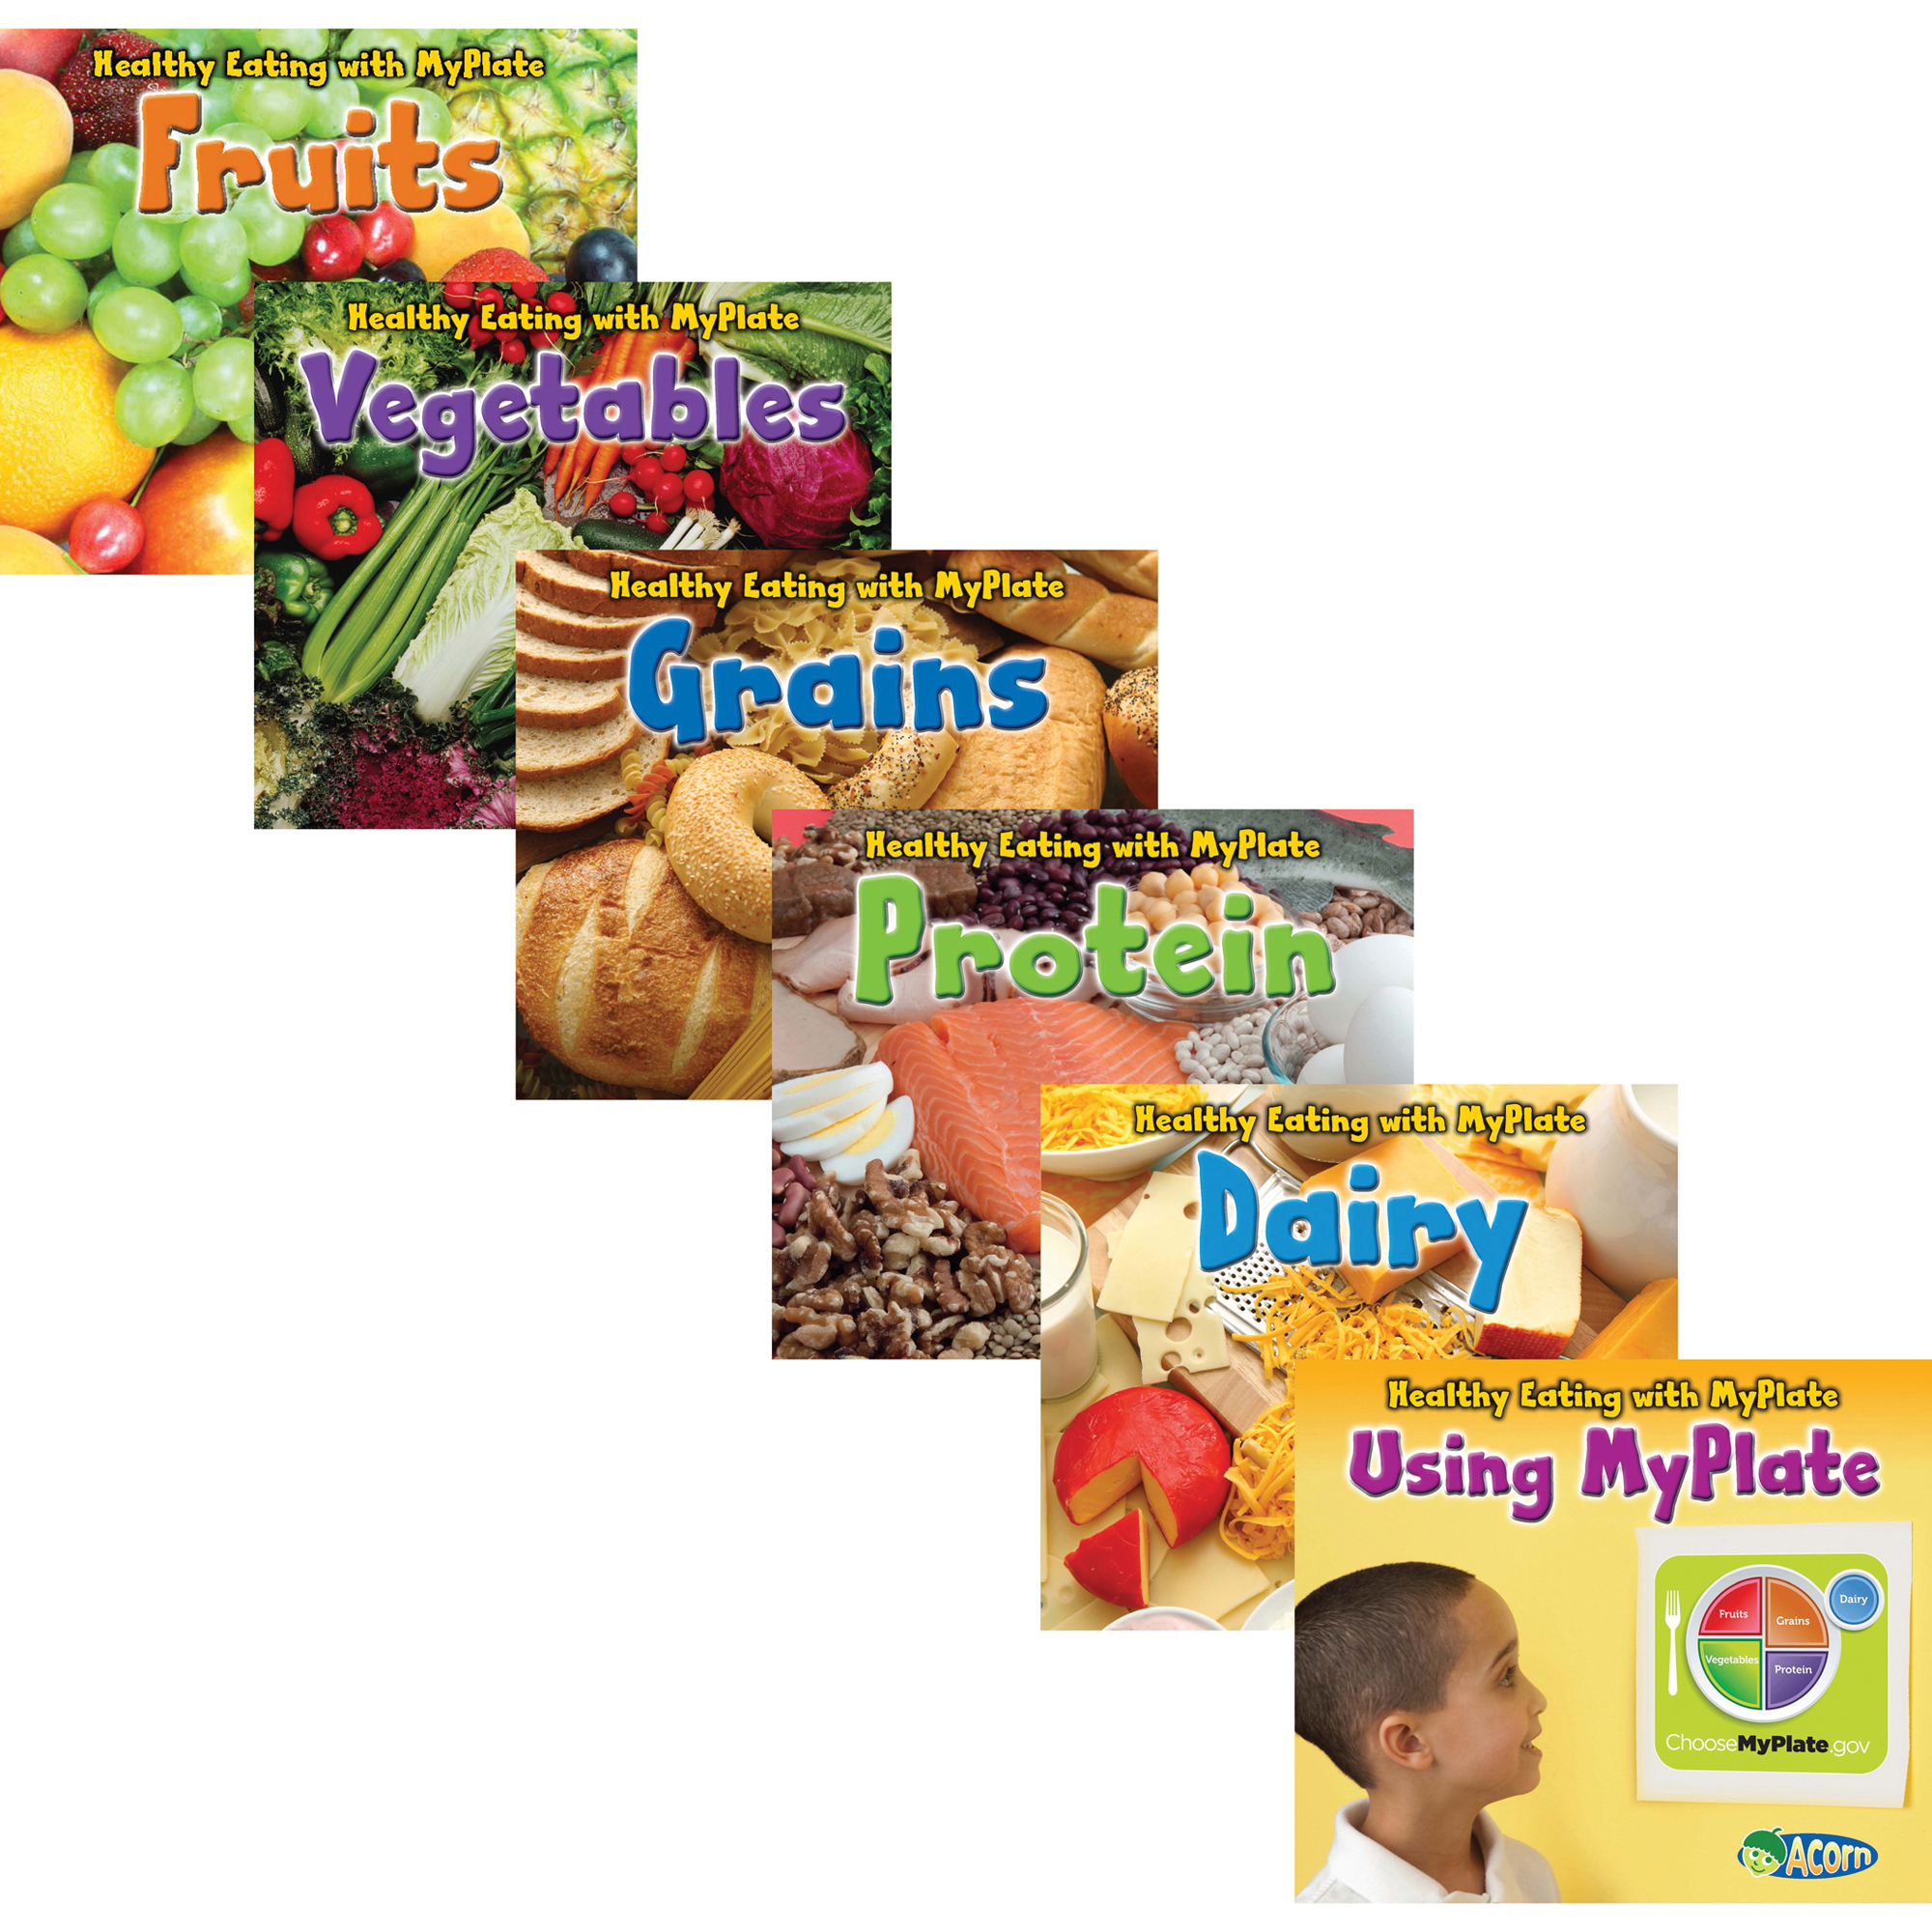 ISBN 9781432969868 product image for Capstone Publishing Healthy Eating With Myplate Book Set Of 6, Multi-Color | upcitemdb.com